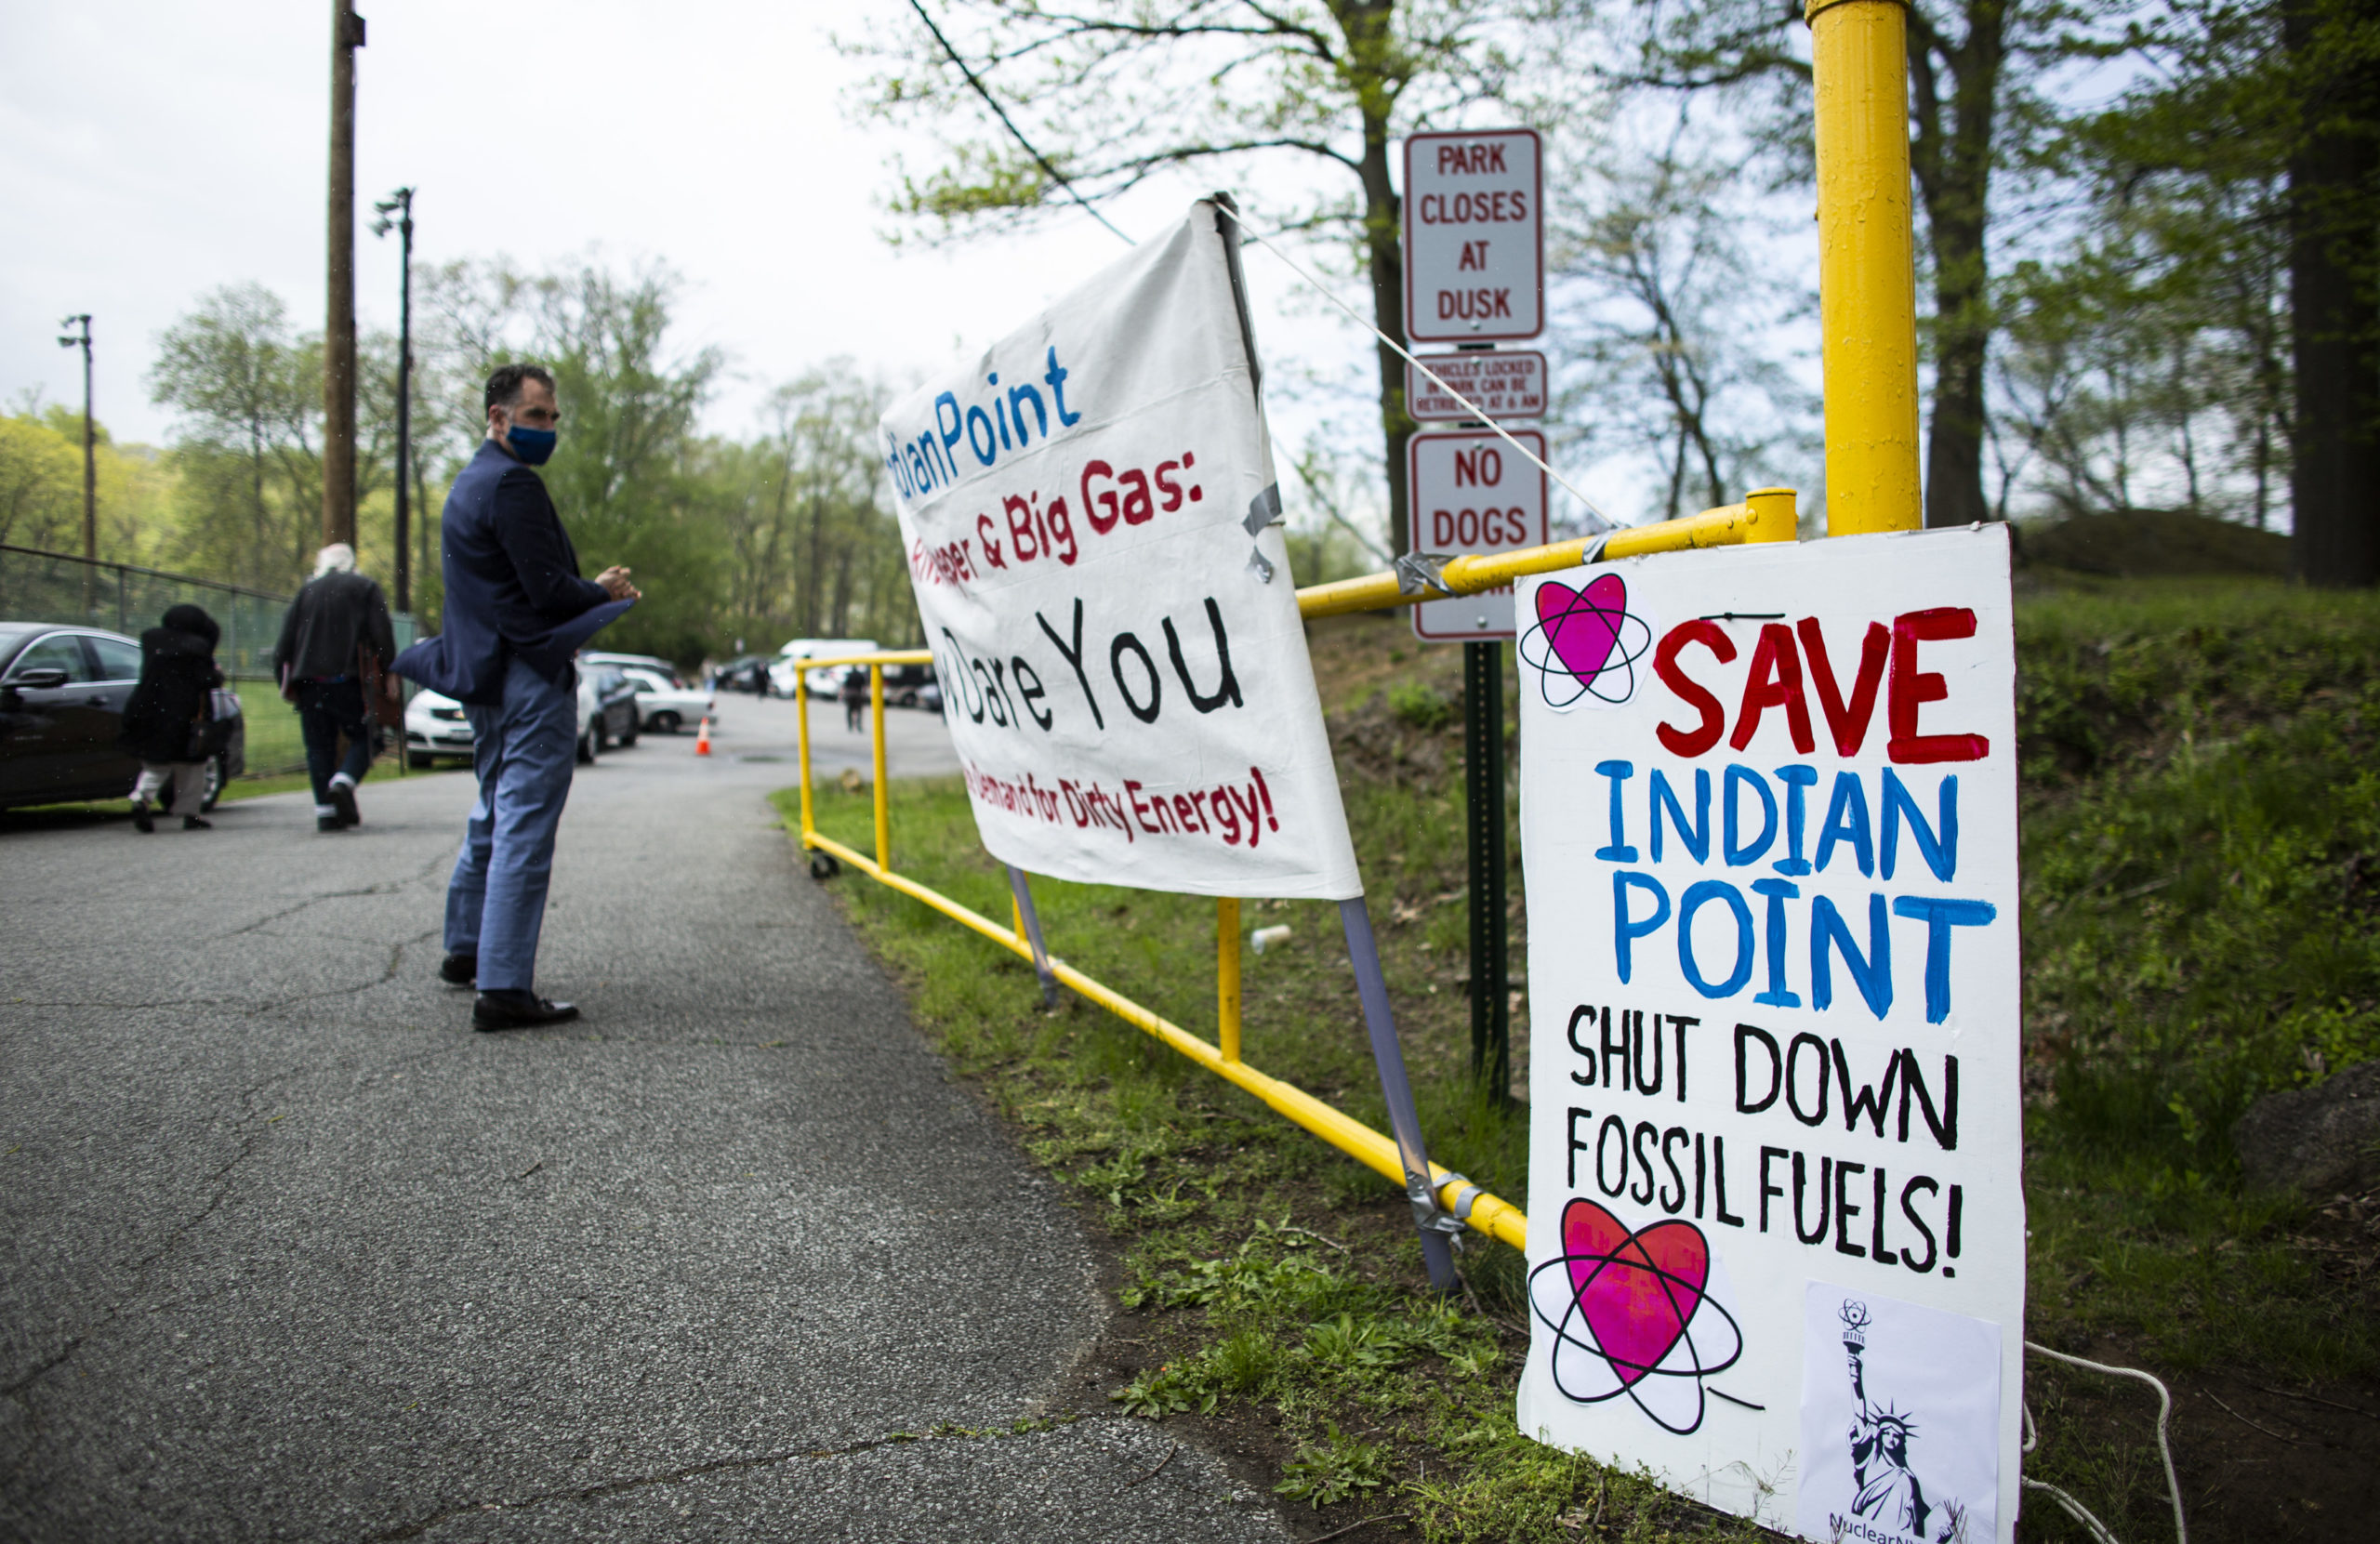 People leave after a ceremony to thank workers of the nuclear plant Indian Point on April 30 in Buchanan, New York. (Kena Betancur/Getty Images)